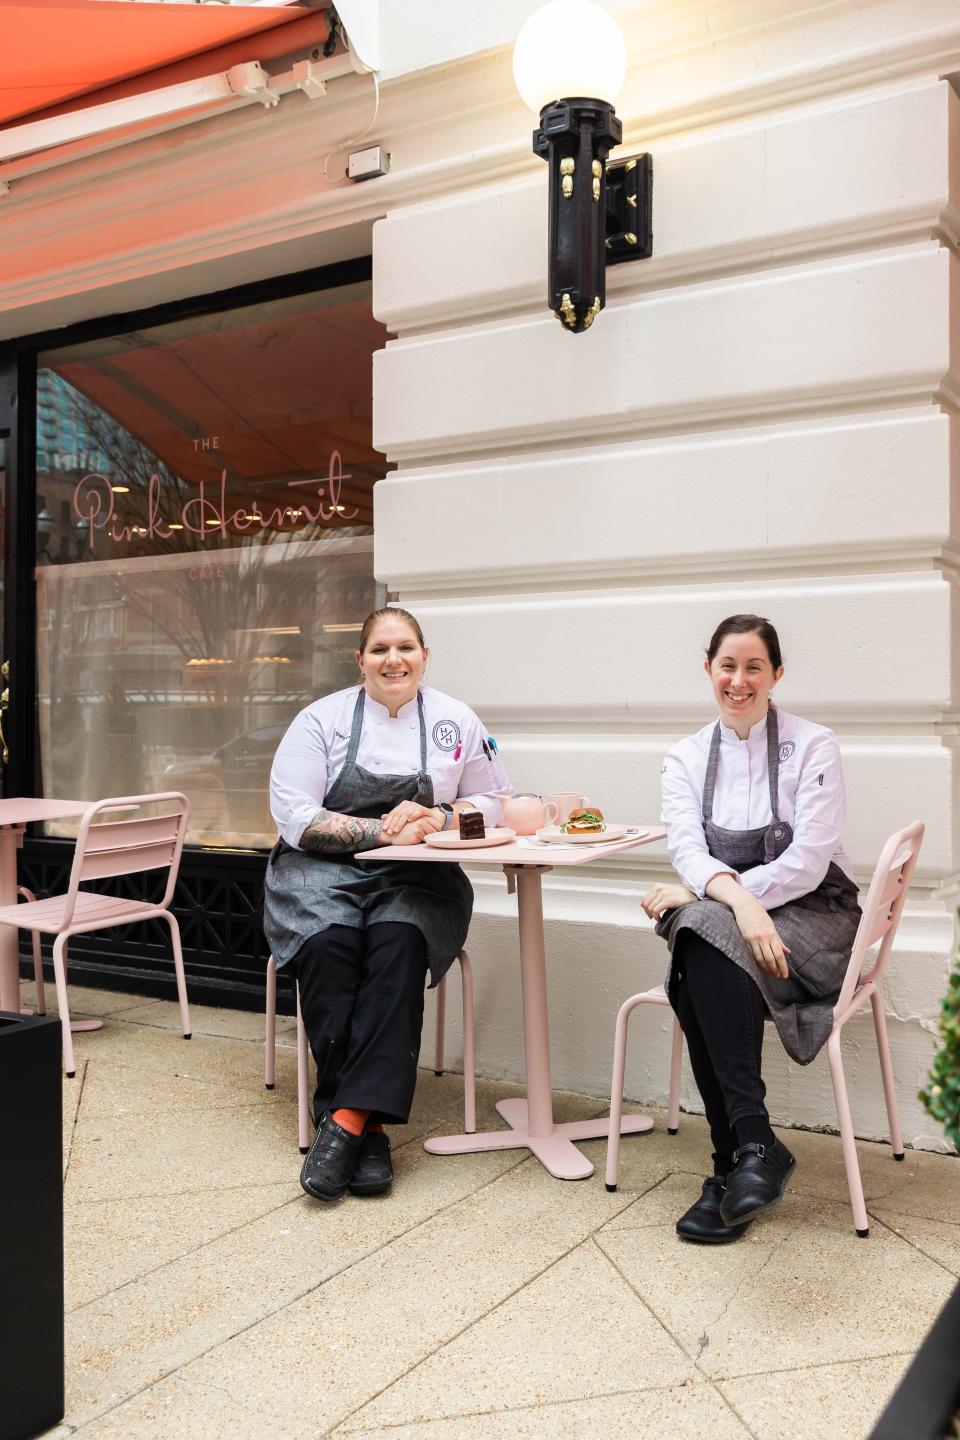 Executive pastry chef Stacy Day, left, and executive chef Kelsi Armijo sit outside The Pink Hermit, a Jean-Georges concept inside the historic Hermitage Hotel.